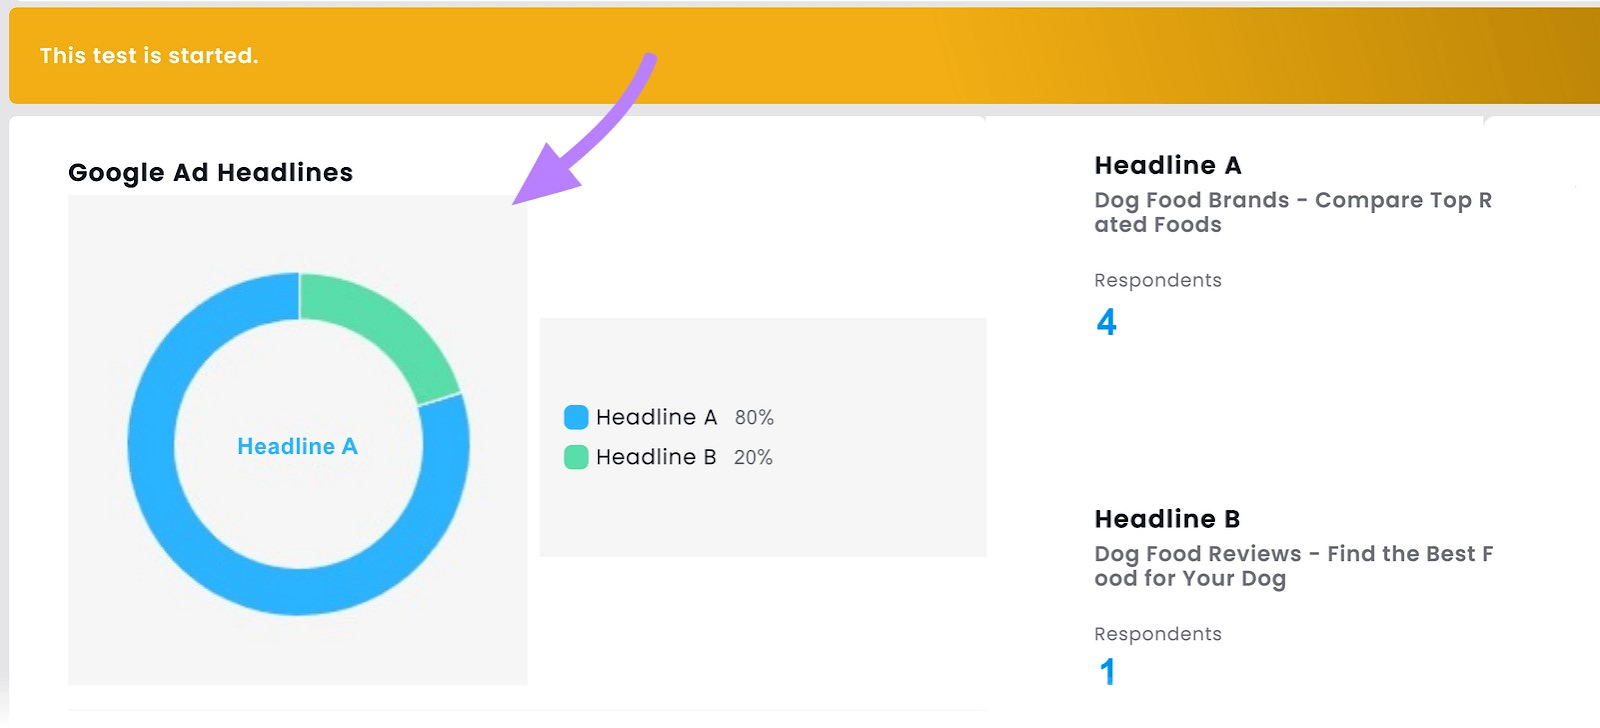 an example of a dashboard showing results of a test for headline A (80%) and headline B (20%) based on 5 responses